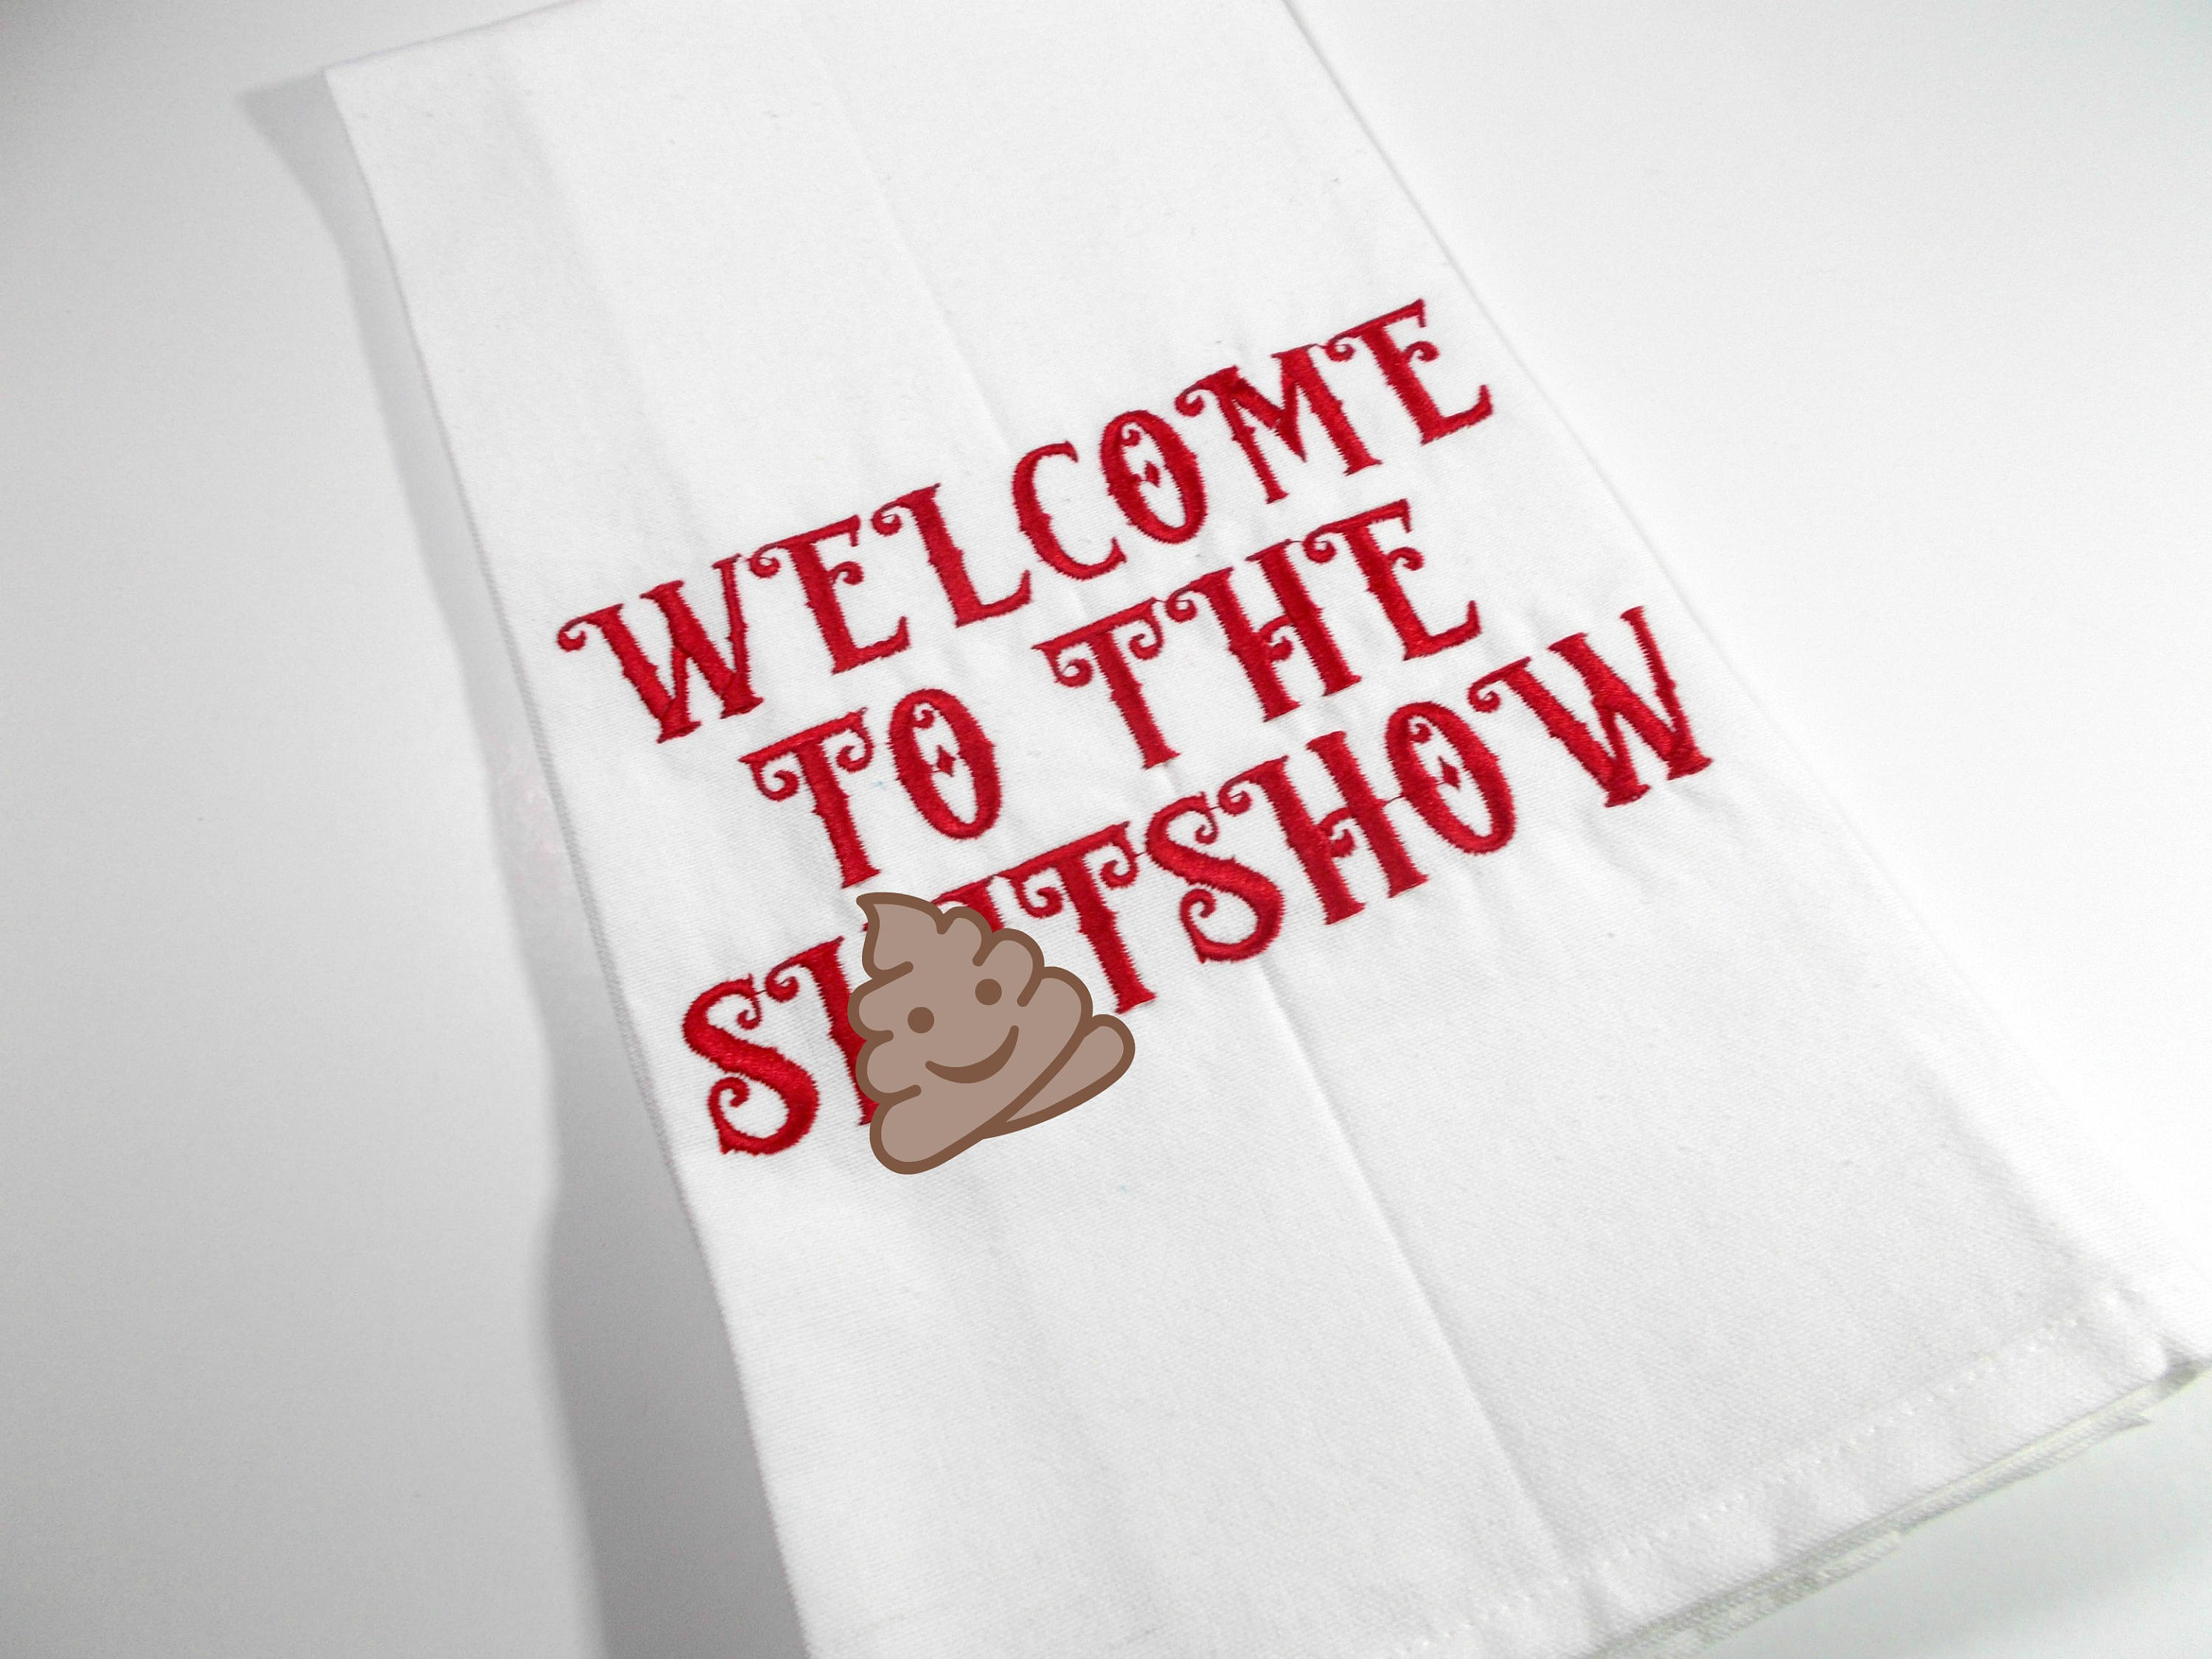 S#itshow - 10 dollar gift - Inappropriate Towel - cuss word towel